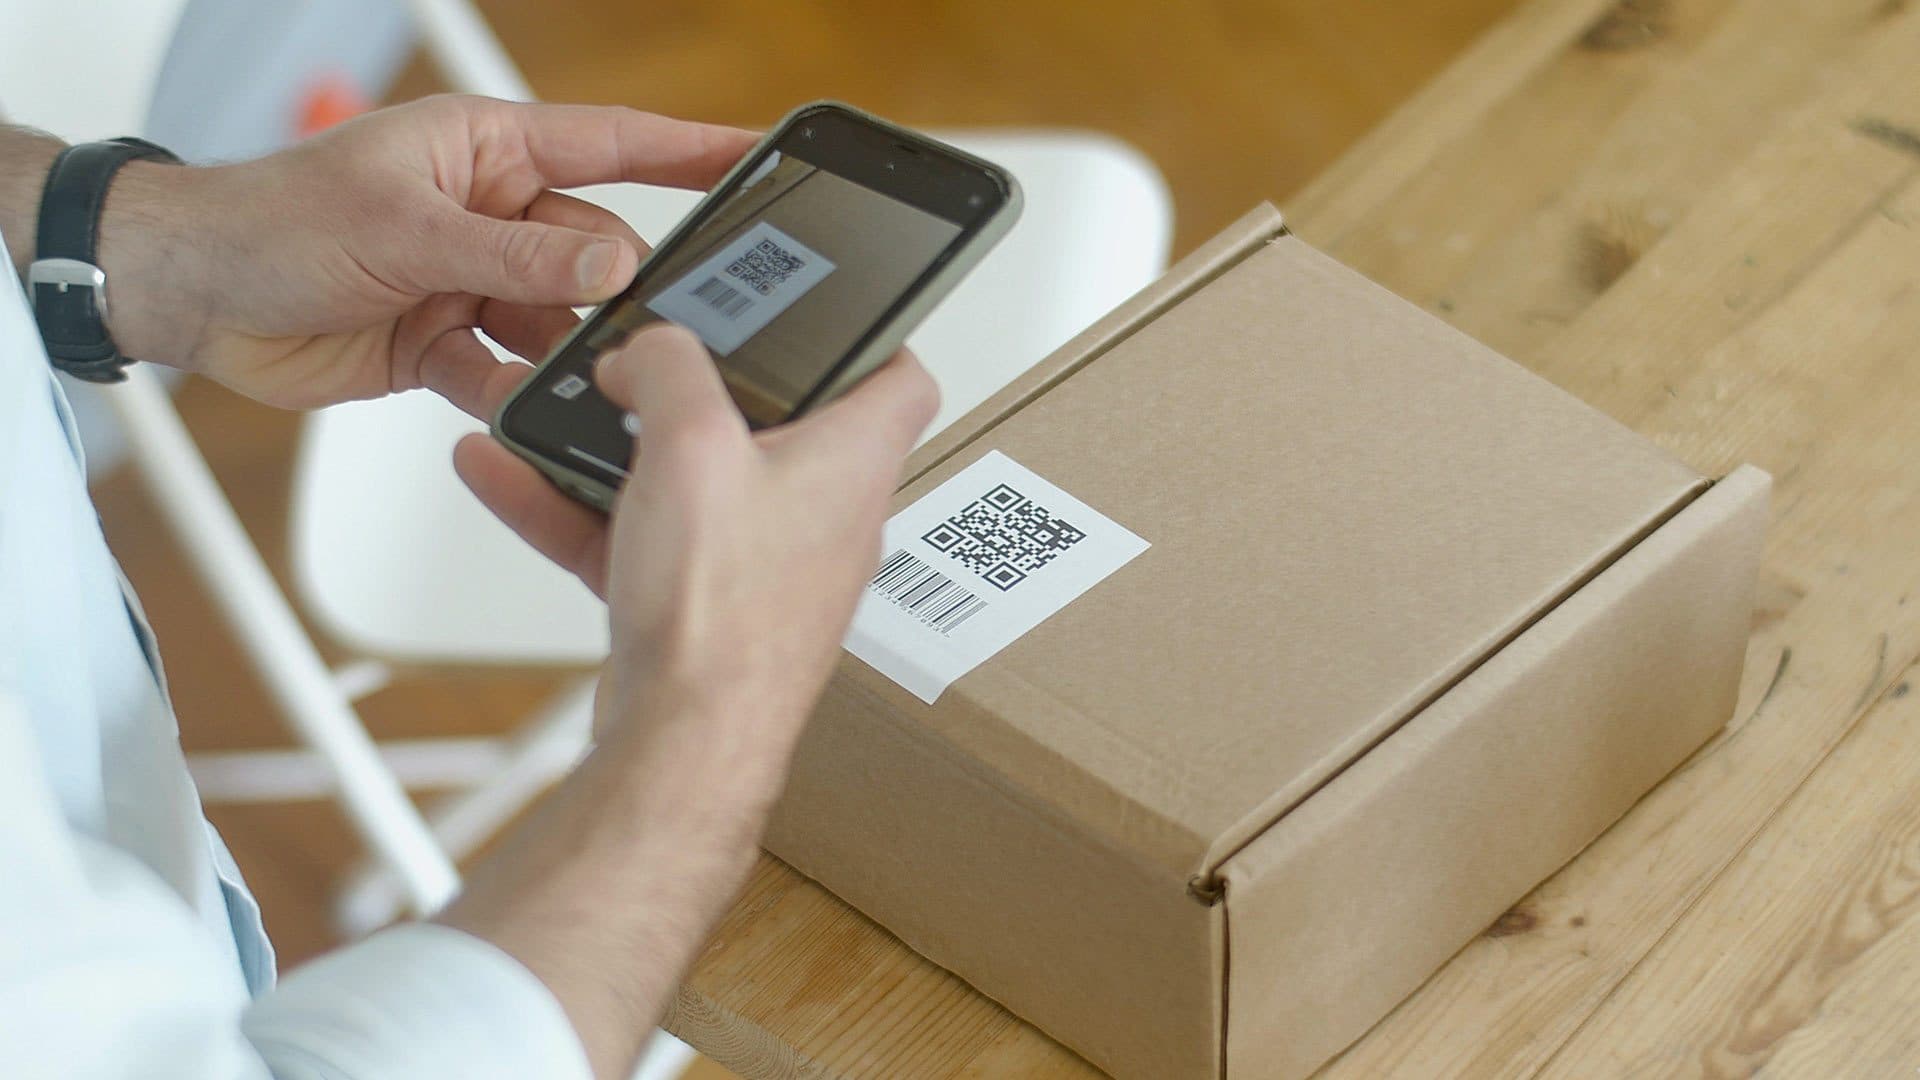 Person uses their smartphone to scan a QR code on a package